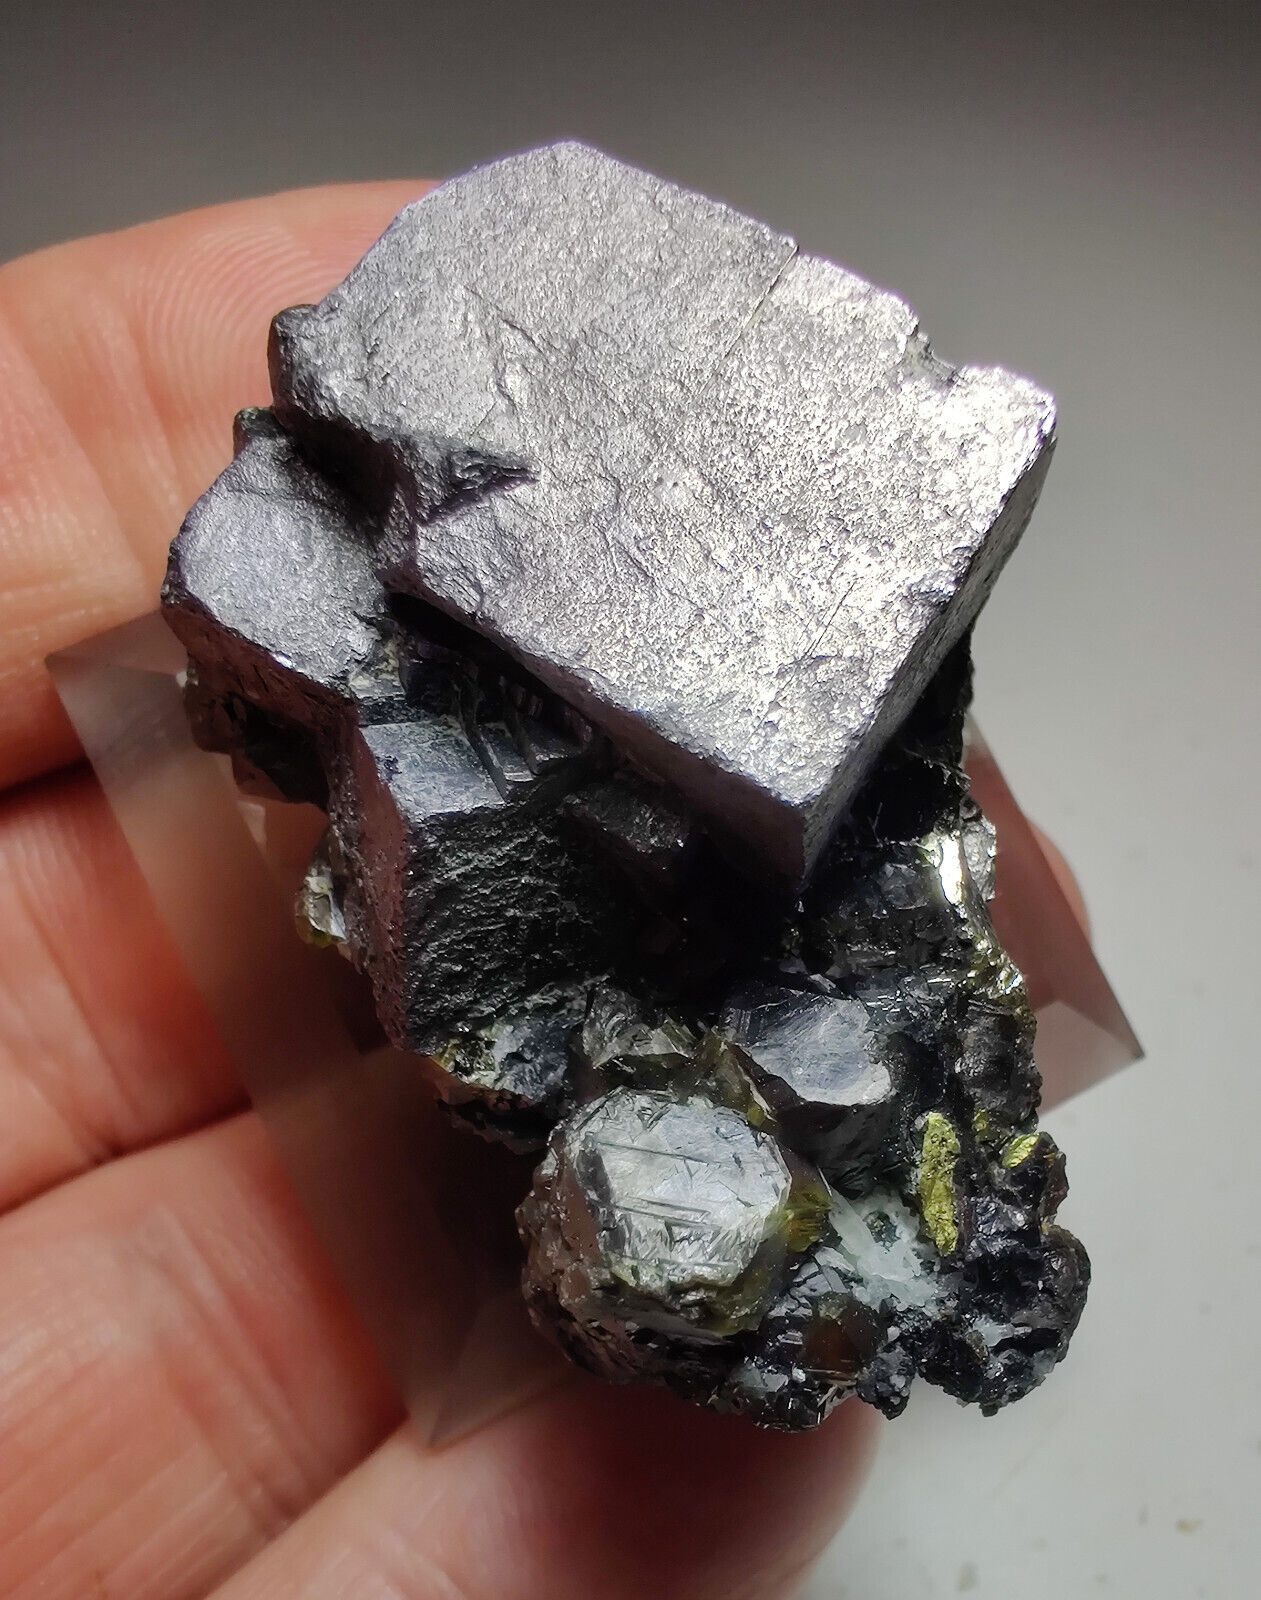 Galena, Sphalerite and Chalcopyrite crystals. Sweetwater Mine, MO. 5 cm. Video